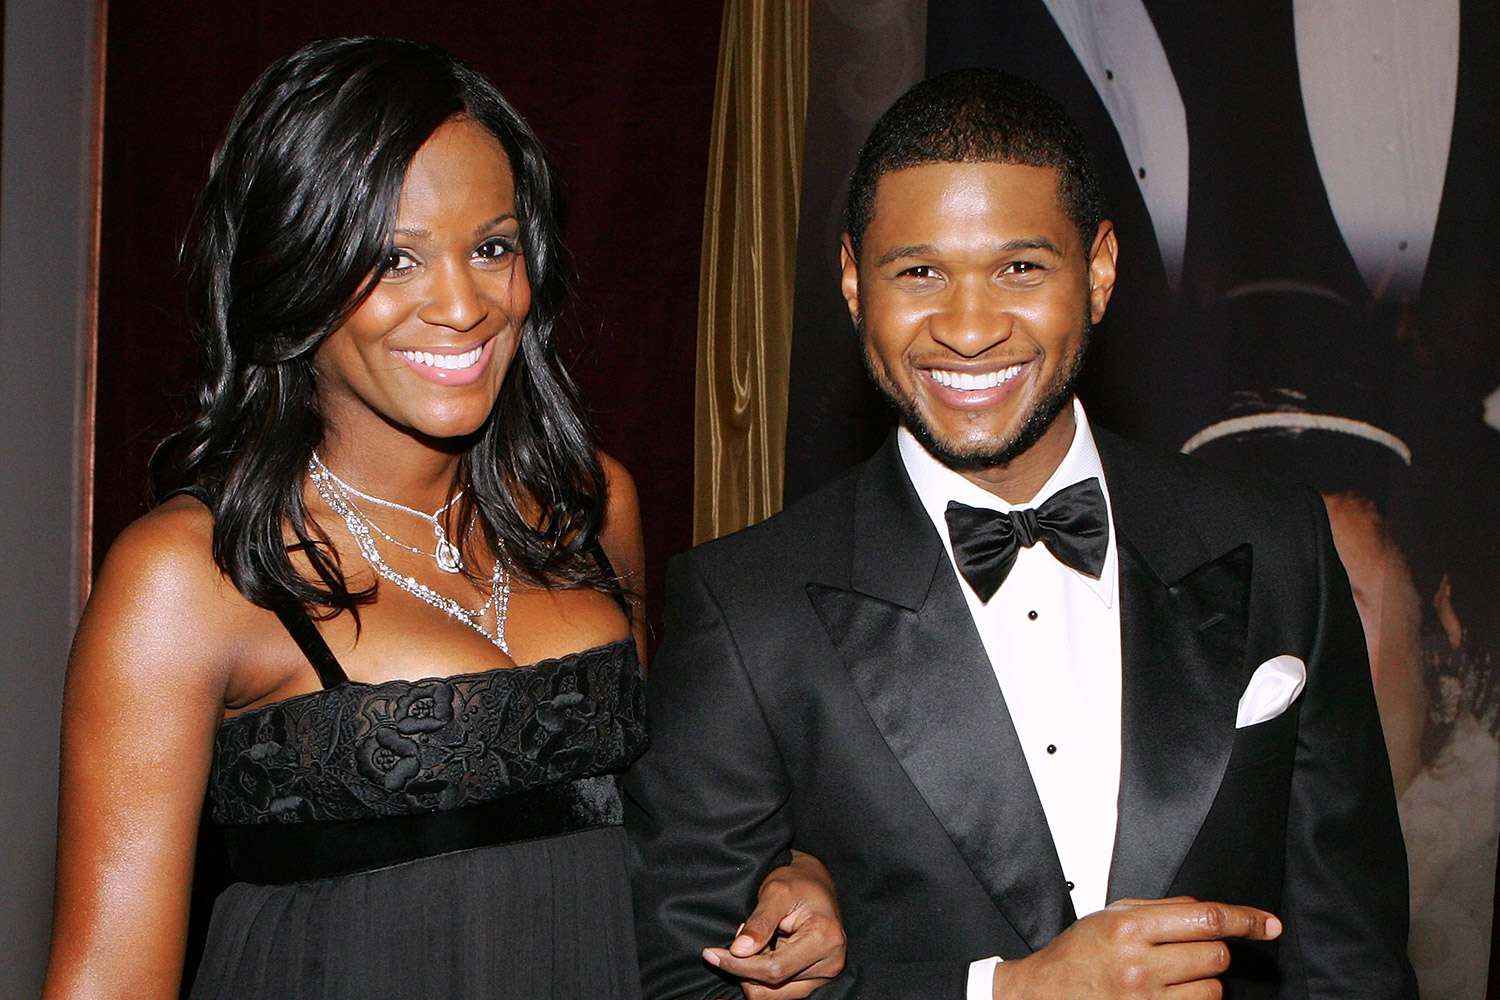 Usher Raymond arrives with girlfriend Tameka Foster at the 15th annual Trumpet Awards at the Bellagio January 22, 2007 in Las Vegas, Nevada